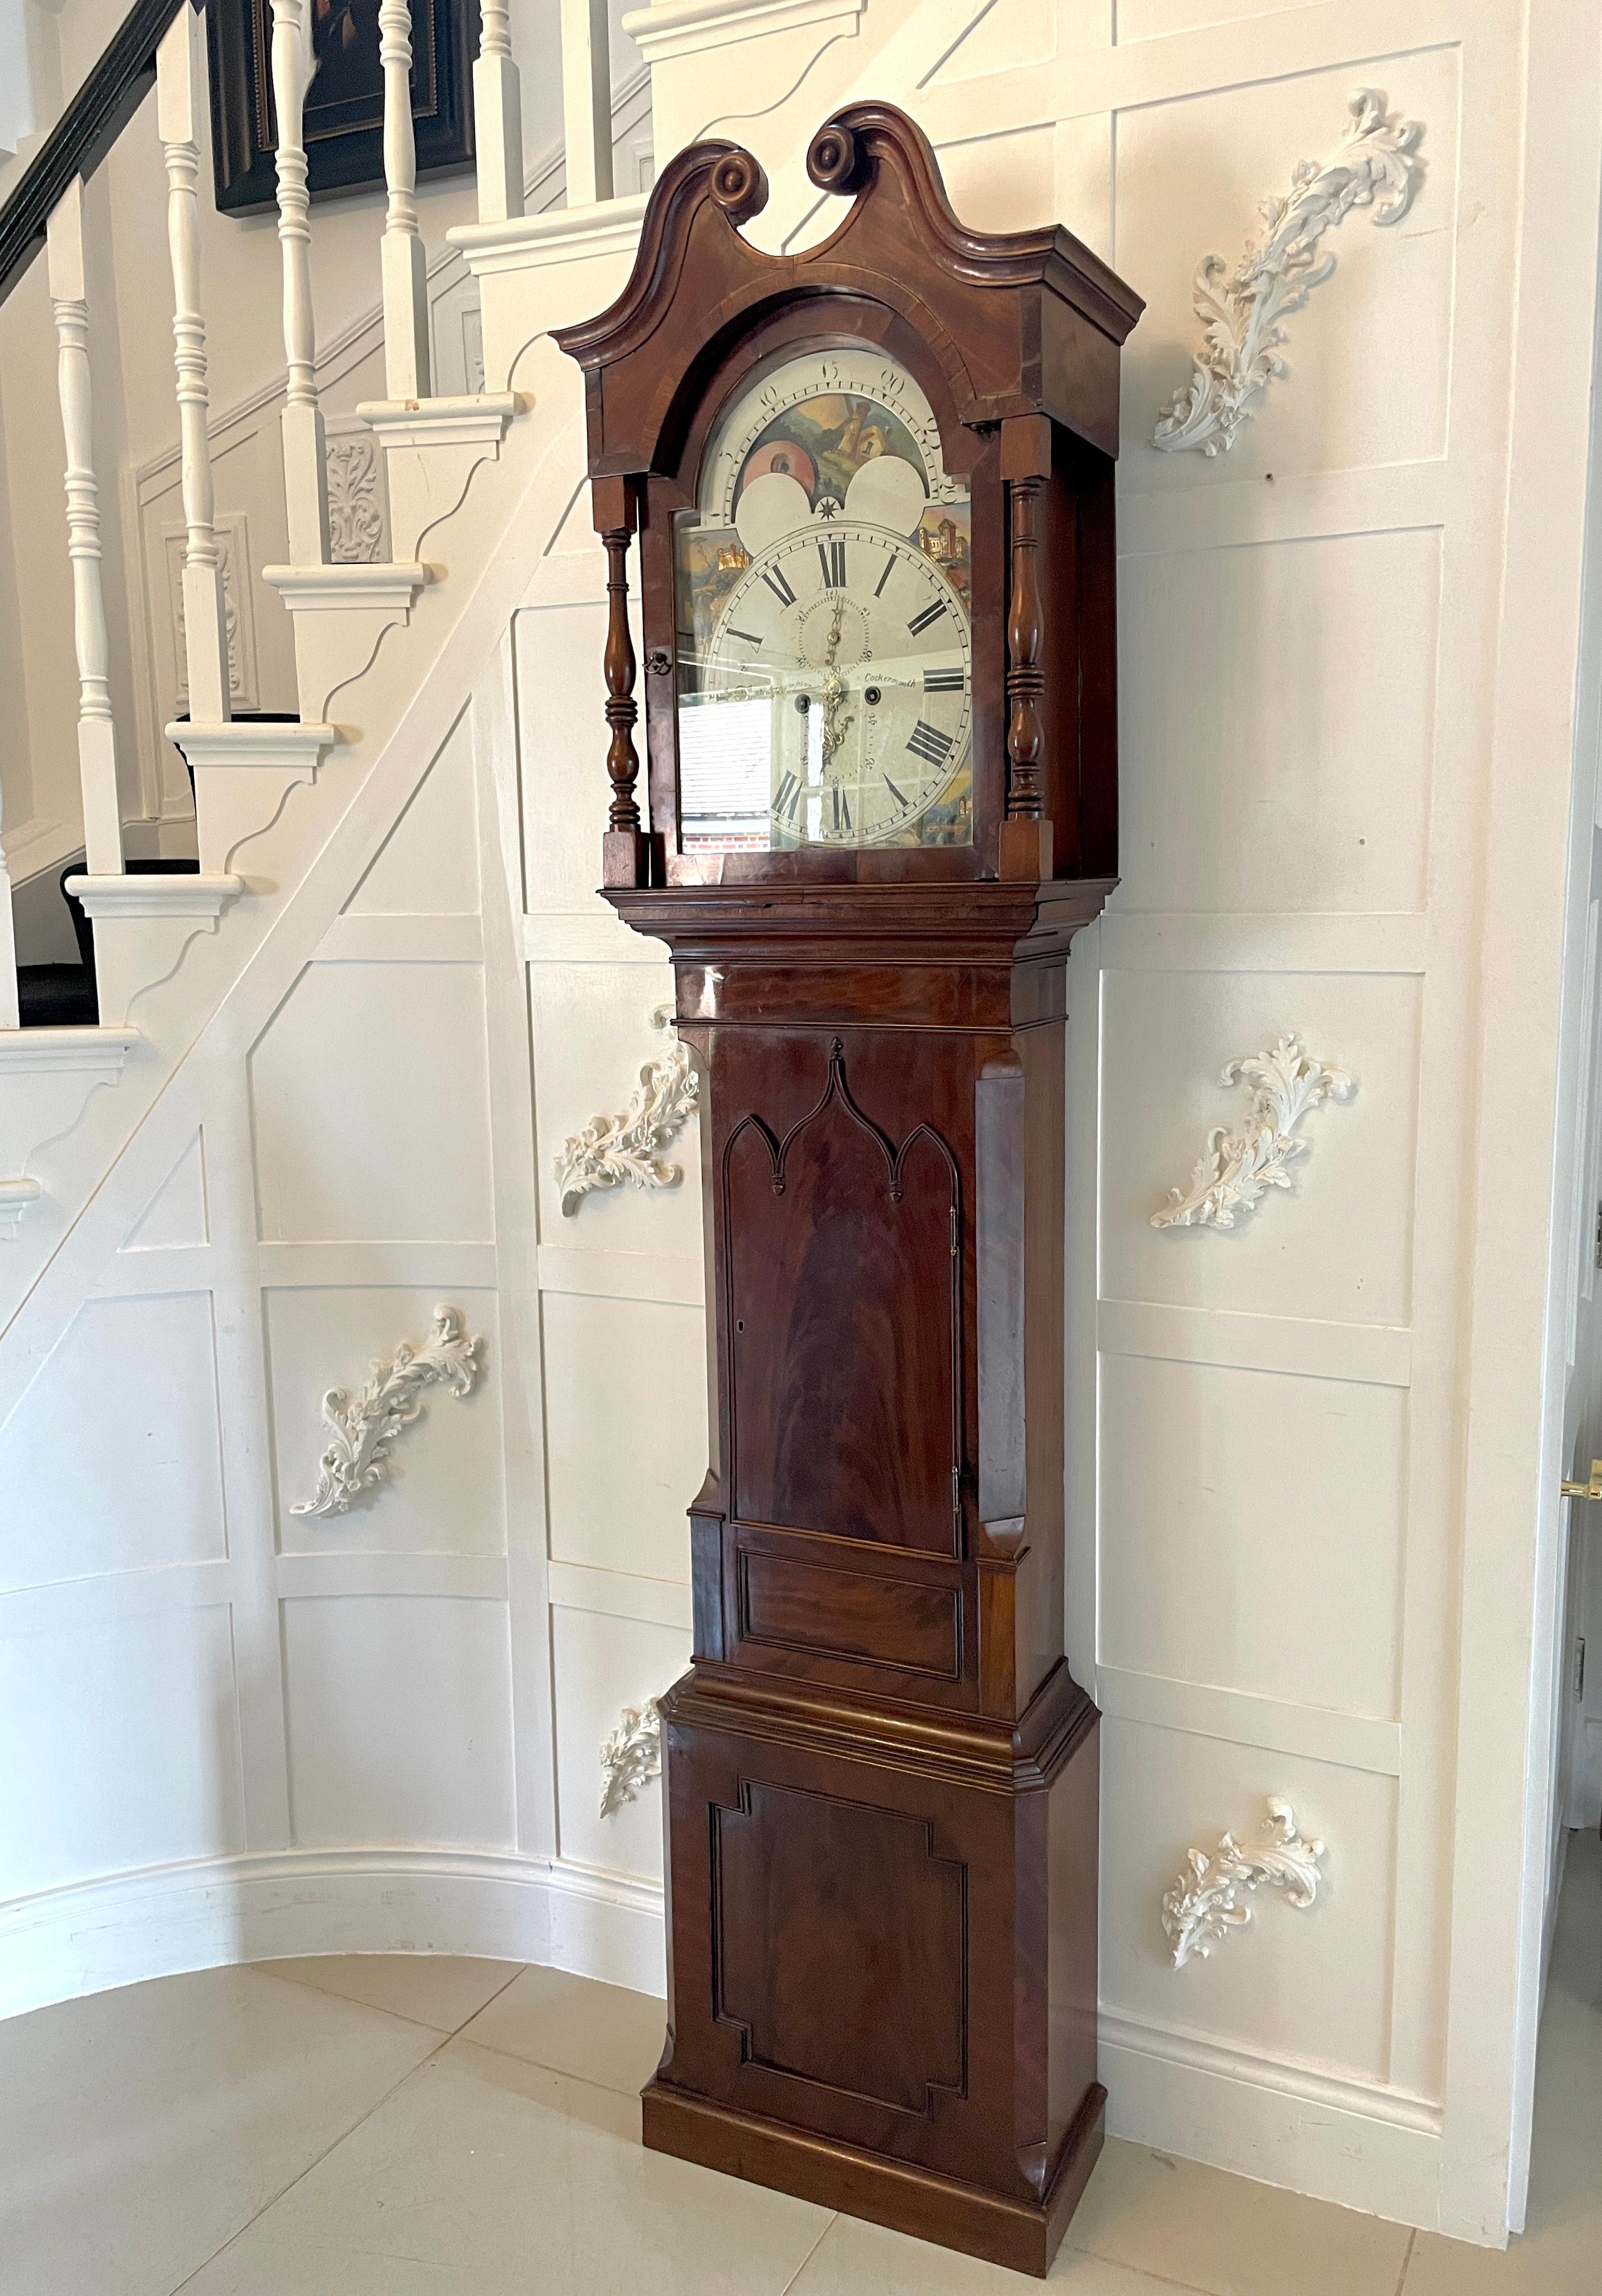 Antique George III quality mahogany 8 day longcase clock having a quality mahogany case with a swan neck pediment, turned columns, mahogany and glass arched shaped door opening to reveal a pretty painted dial with a moon phase in the arch top, 8 day